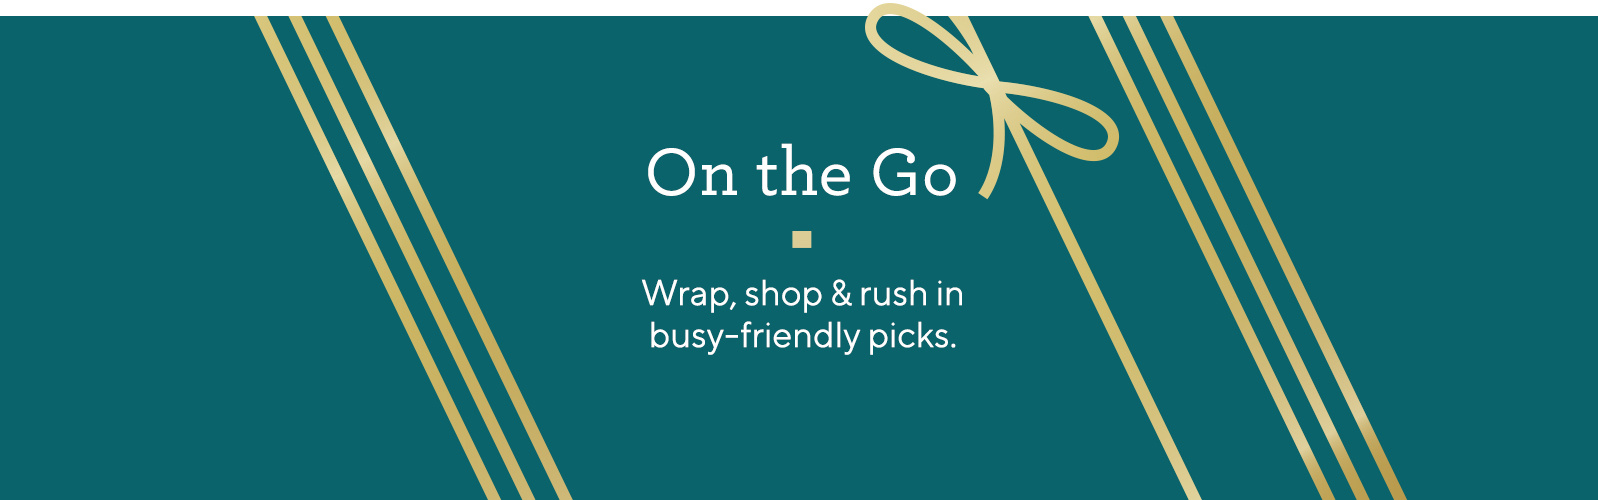 On the Go  Wrap, shop & rush in busy-friendly picks.